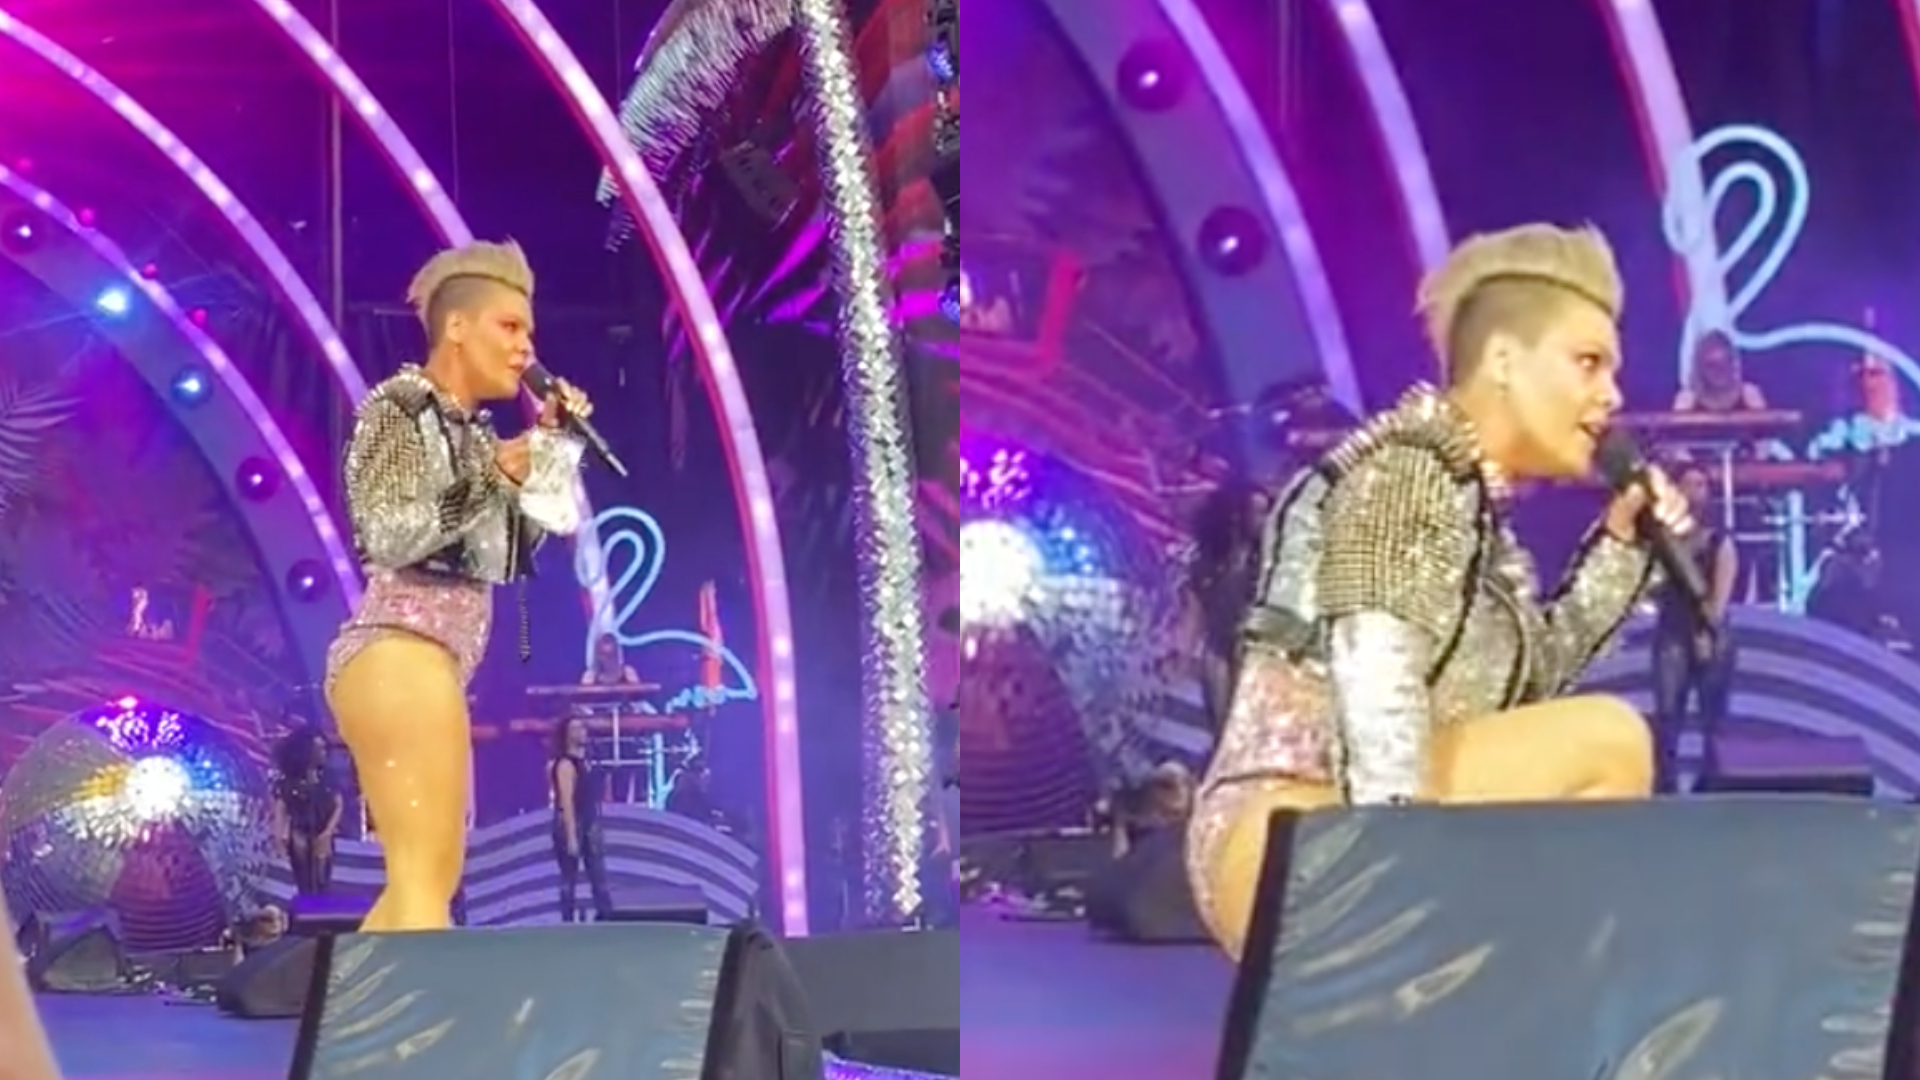 A fan throws ashes on stage during a performance of P!  nk and the singer is shocked: “Is this your mother?”  ;  He watches